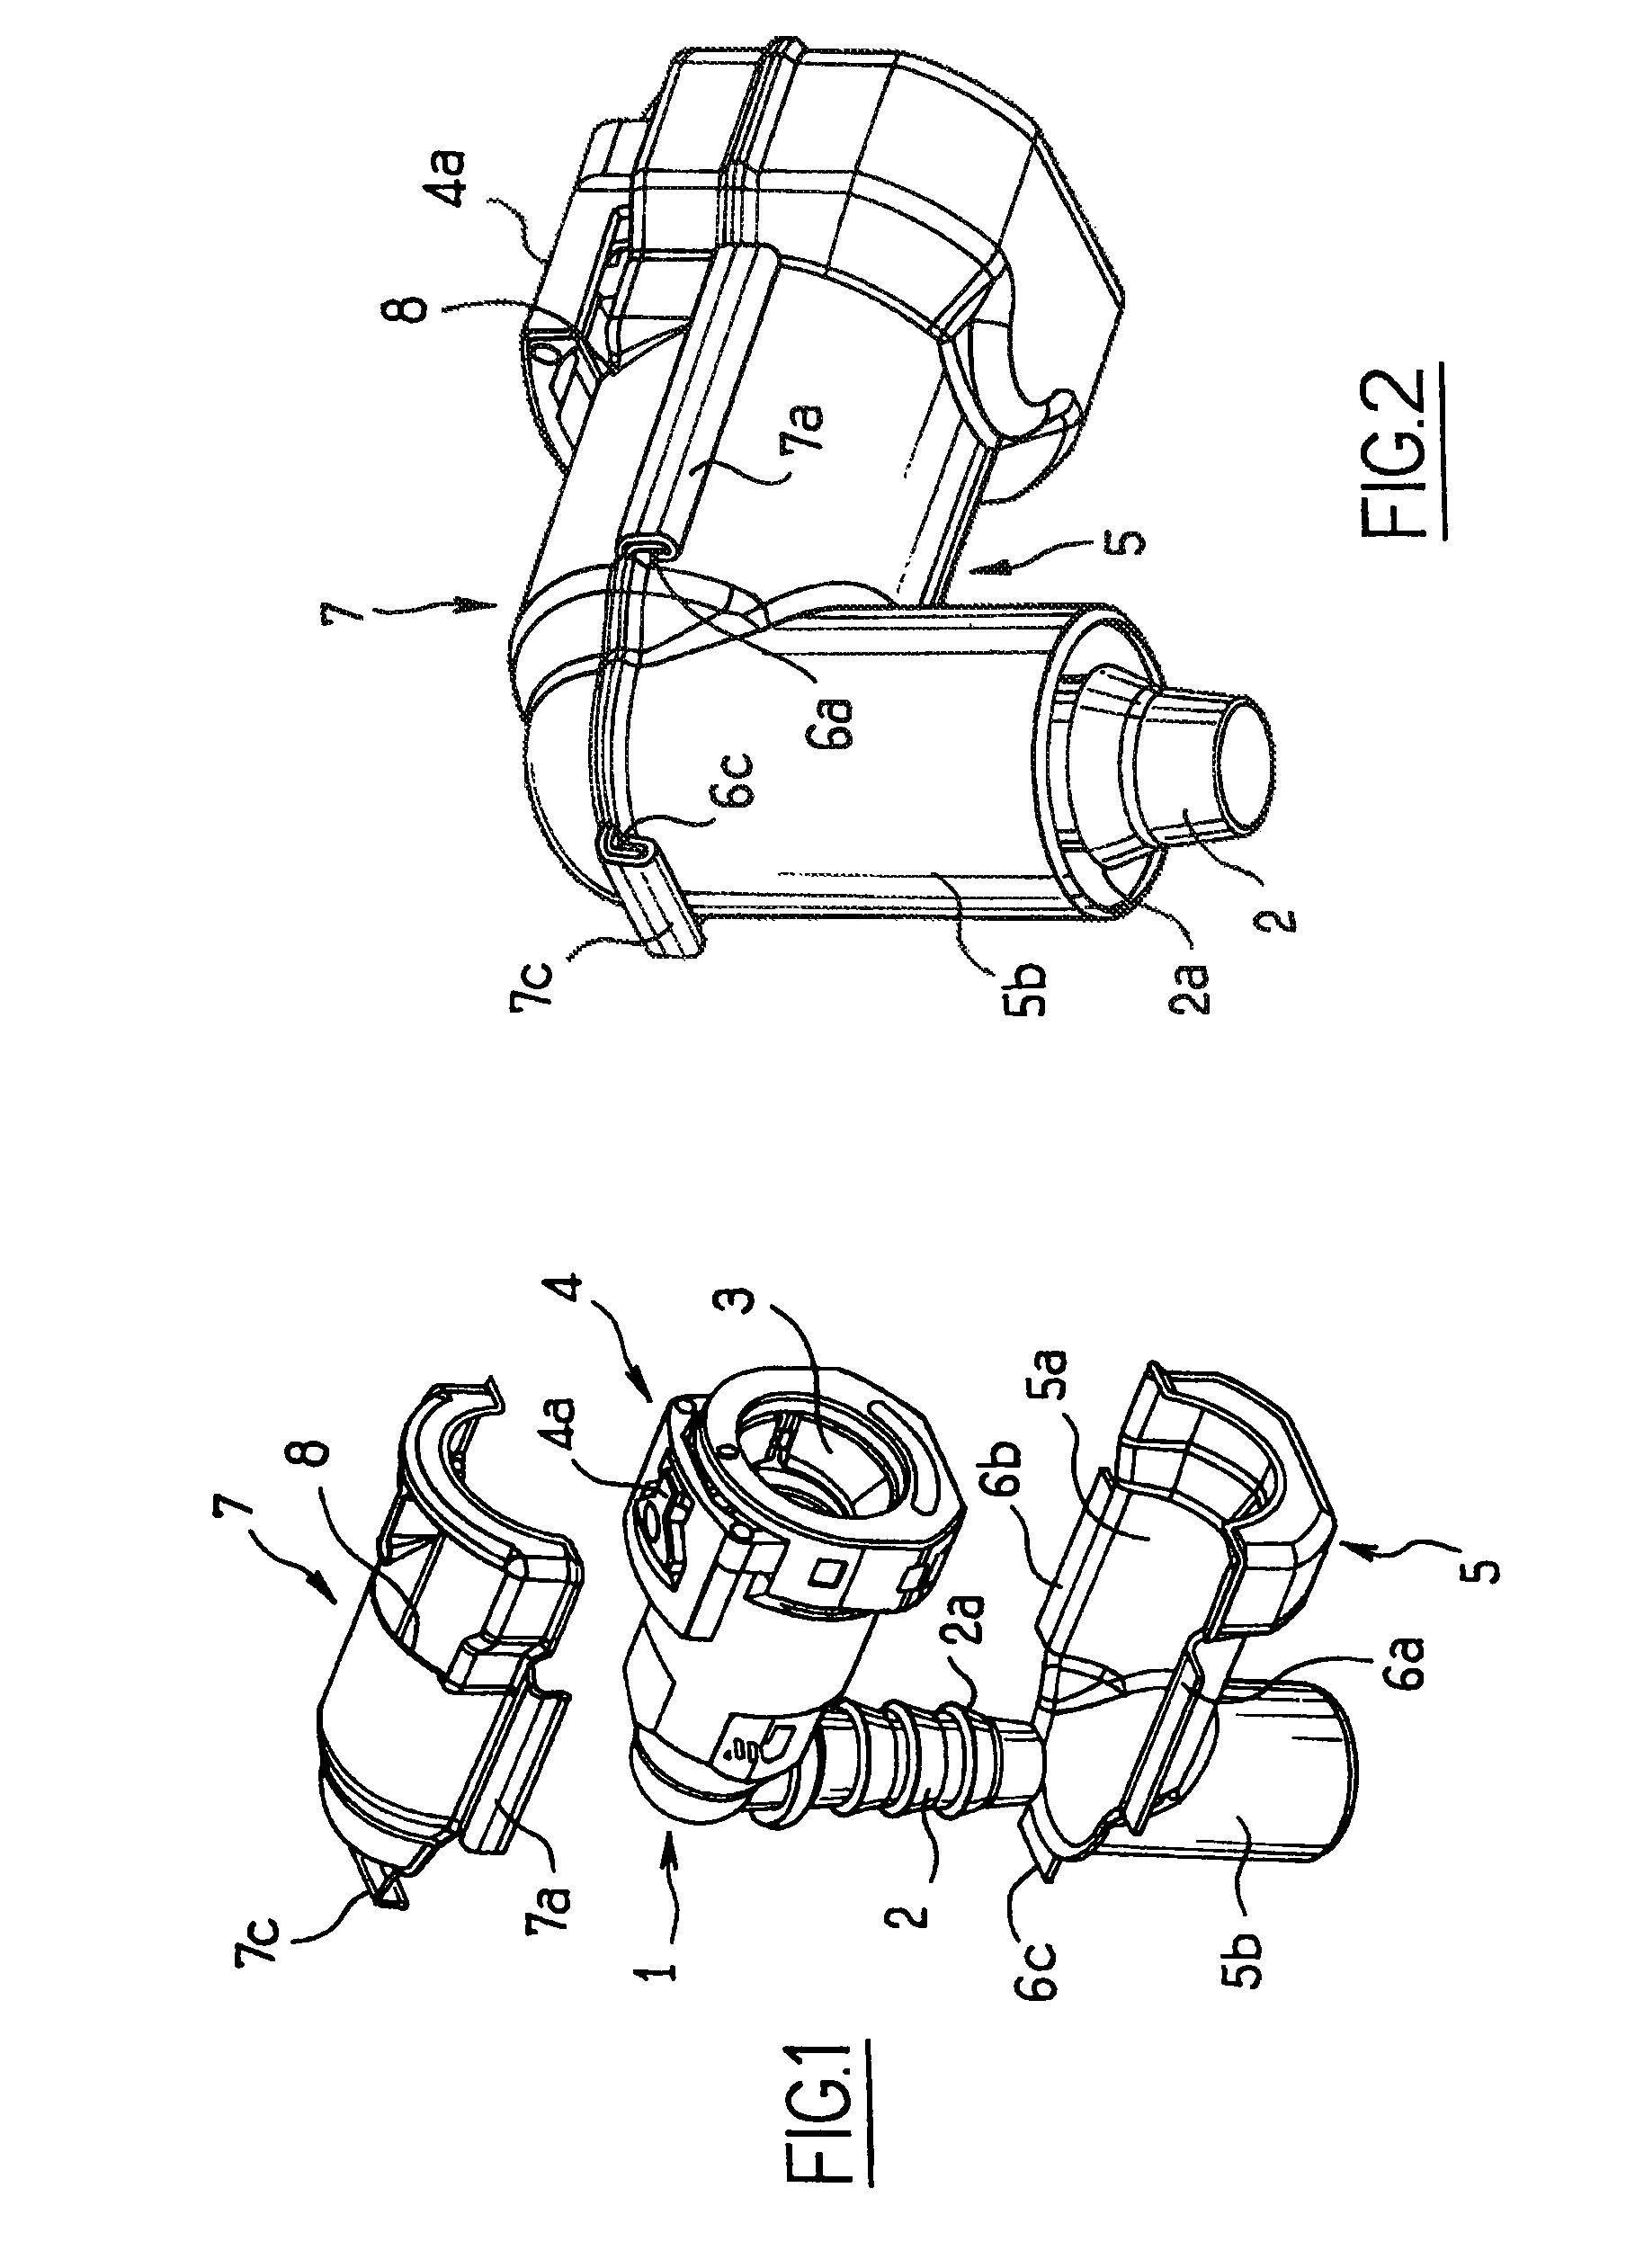 Coupling device for a motor vehicle fluid circuit